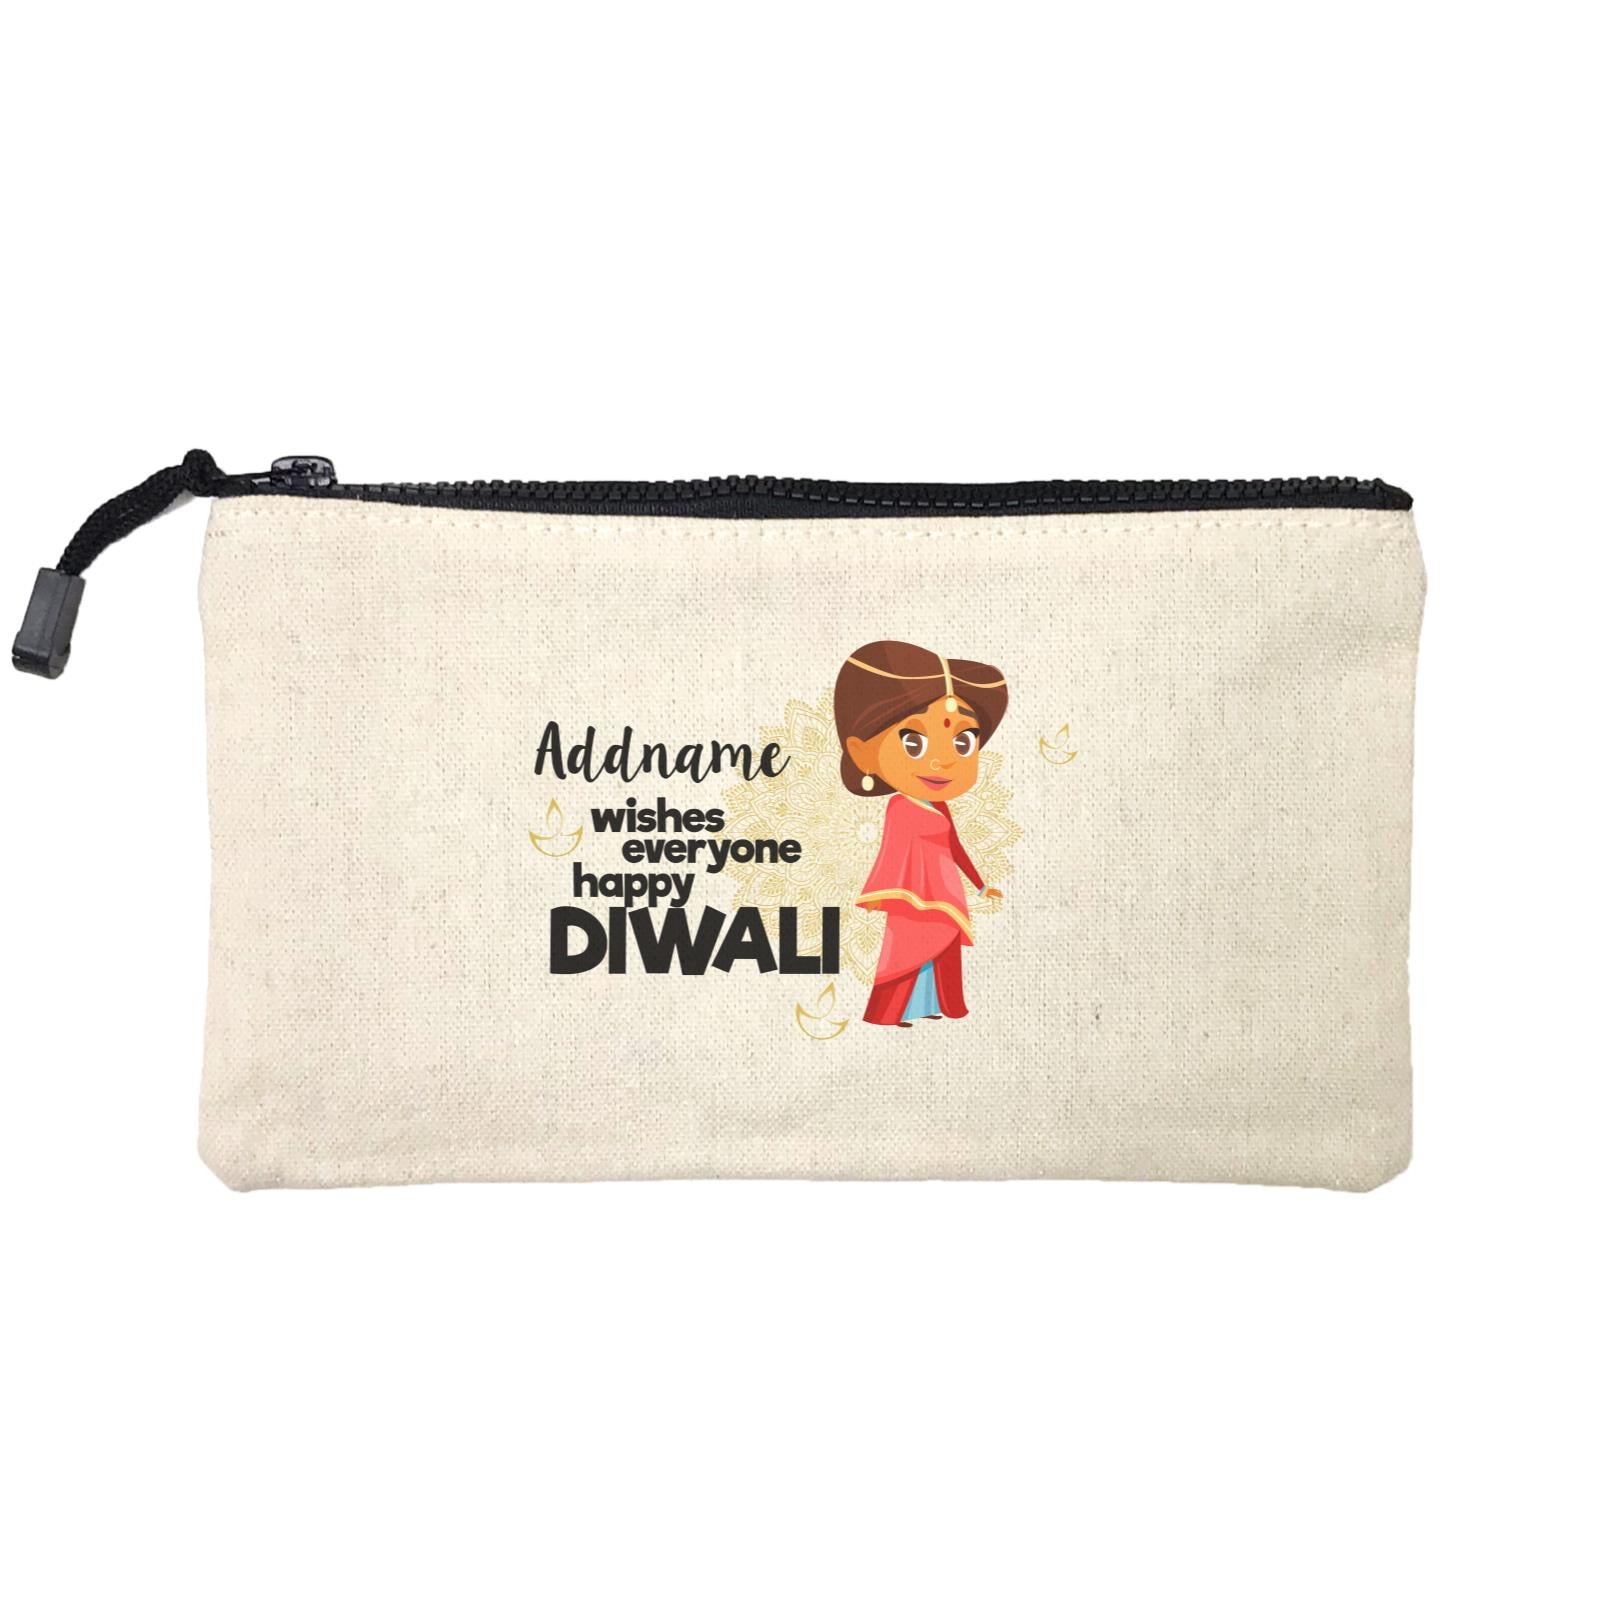 Cute Woman Wishes Everyone Happy Diwali Addname Mini Accessories Stationery Pouch